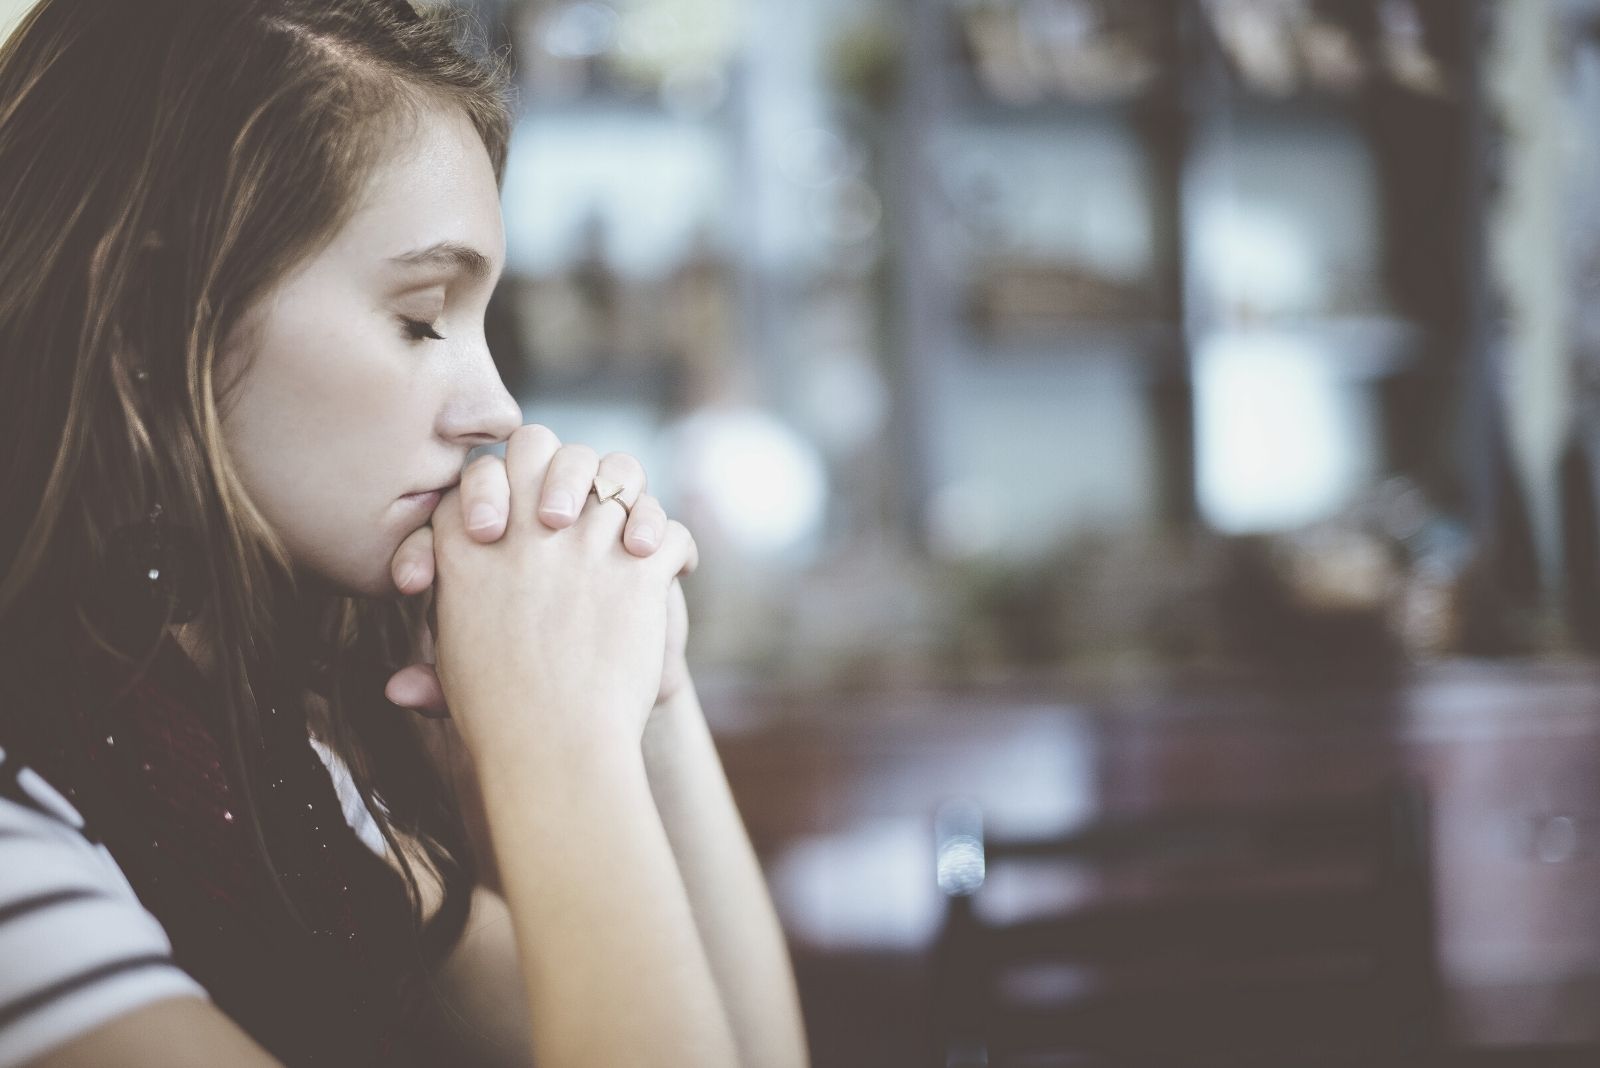 woman praying indoors in sideview with close fist near the face